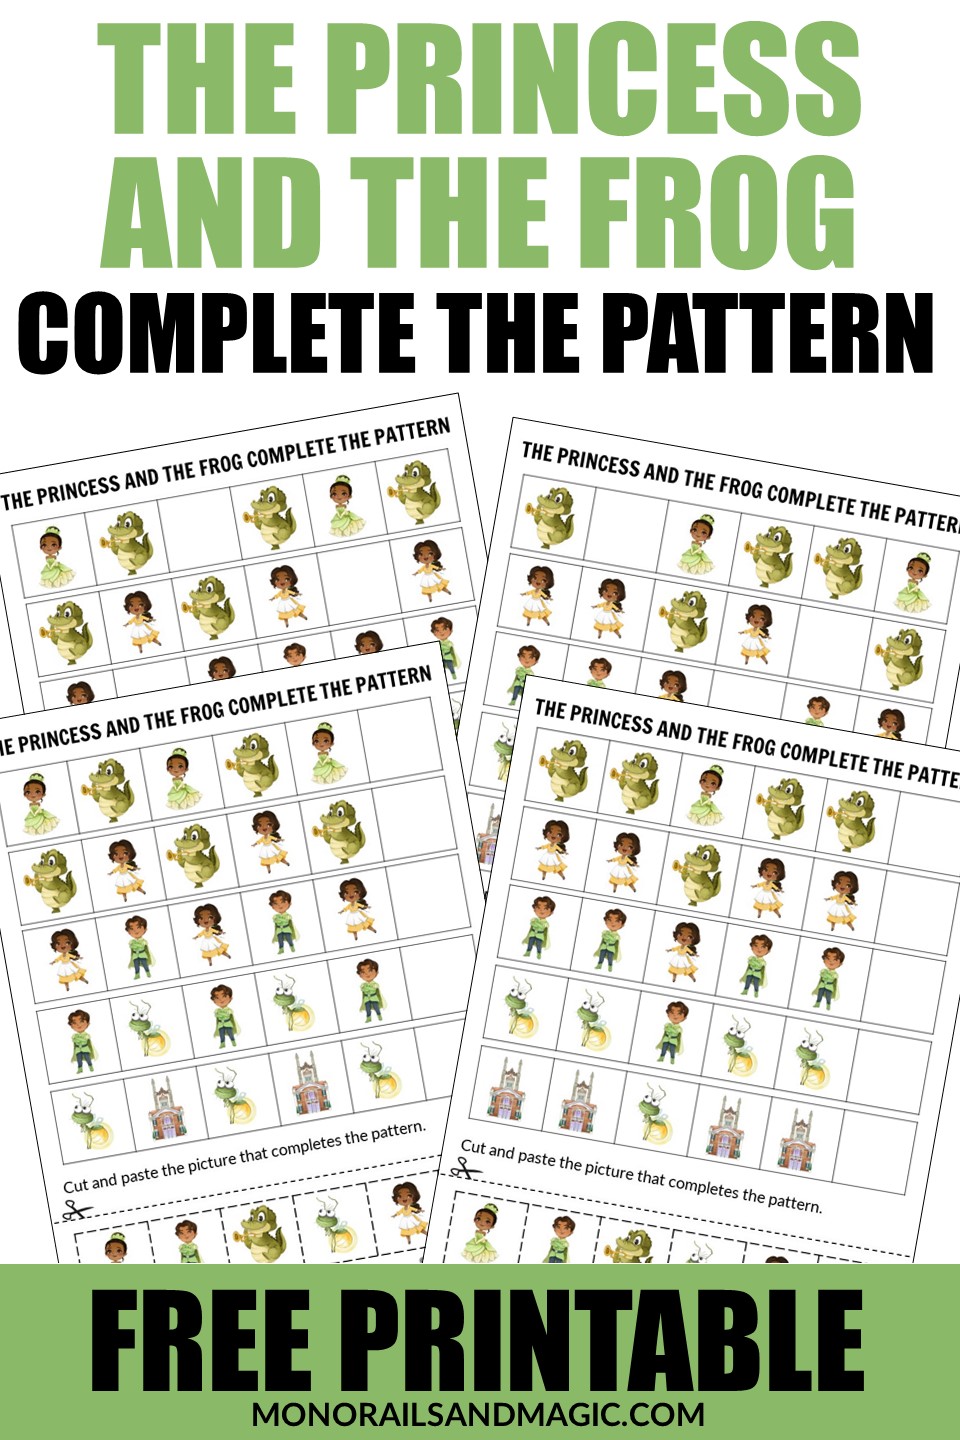 Free printable The Princess and the Frog complete the pattern activity for kids.